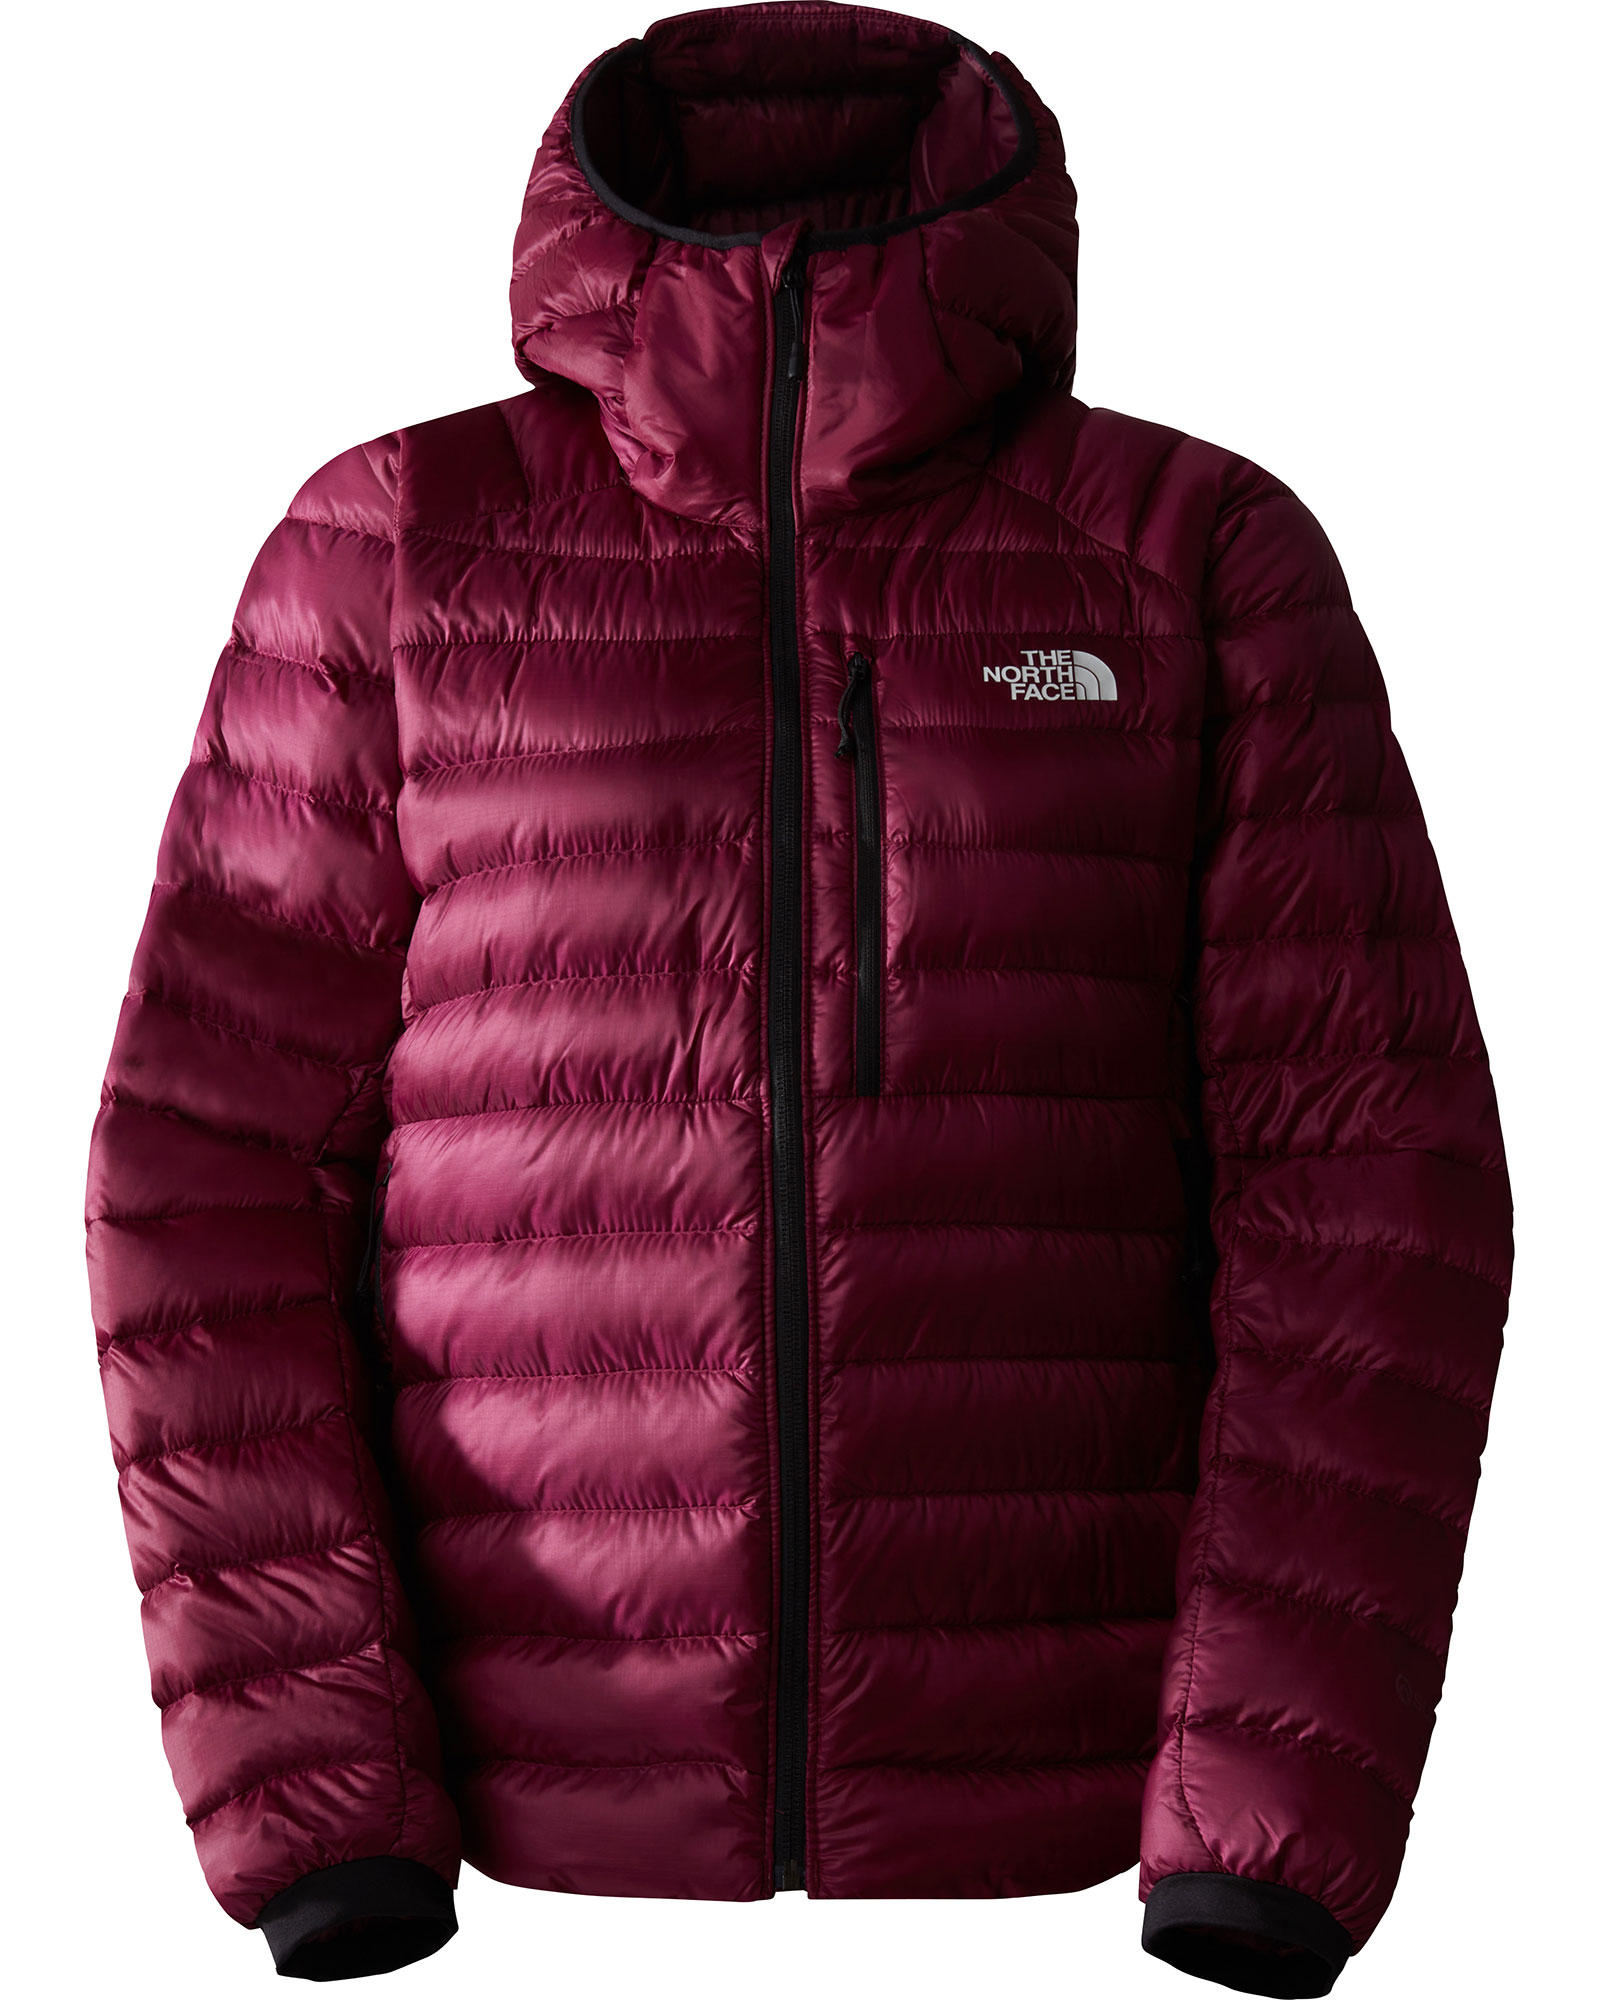 The North Face Summit Breithorn Women’s Down Hoodie - Boysenberry L